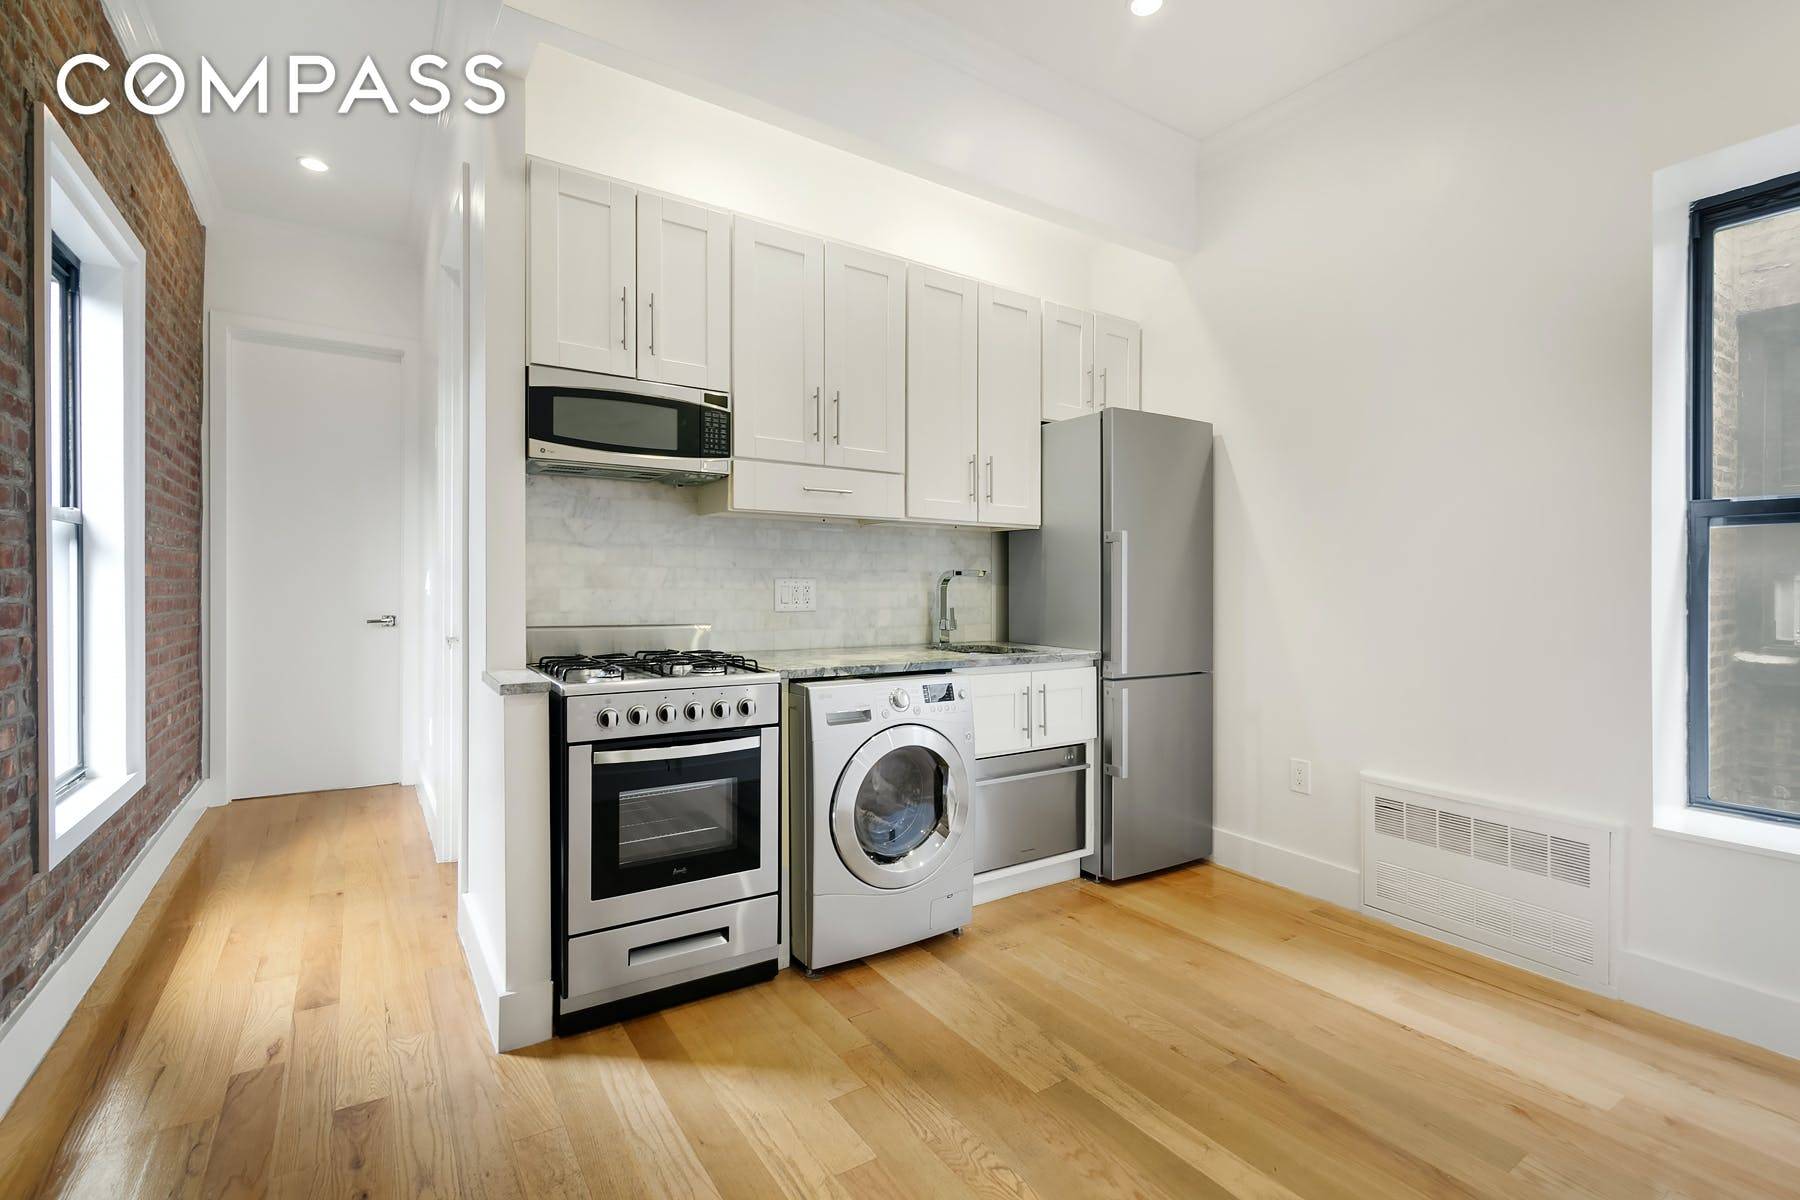 Steps from Washington Square Park, completely renovated two bedroom with your own washer dryer unit, dishwasher, stainless steel appliances, high ceilings, tons of exposed brick, three exposures, slate bathroom walls, ...